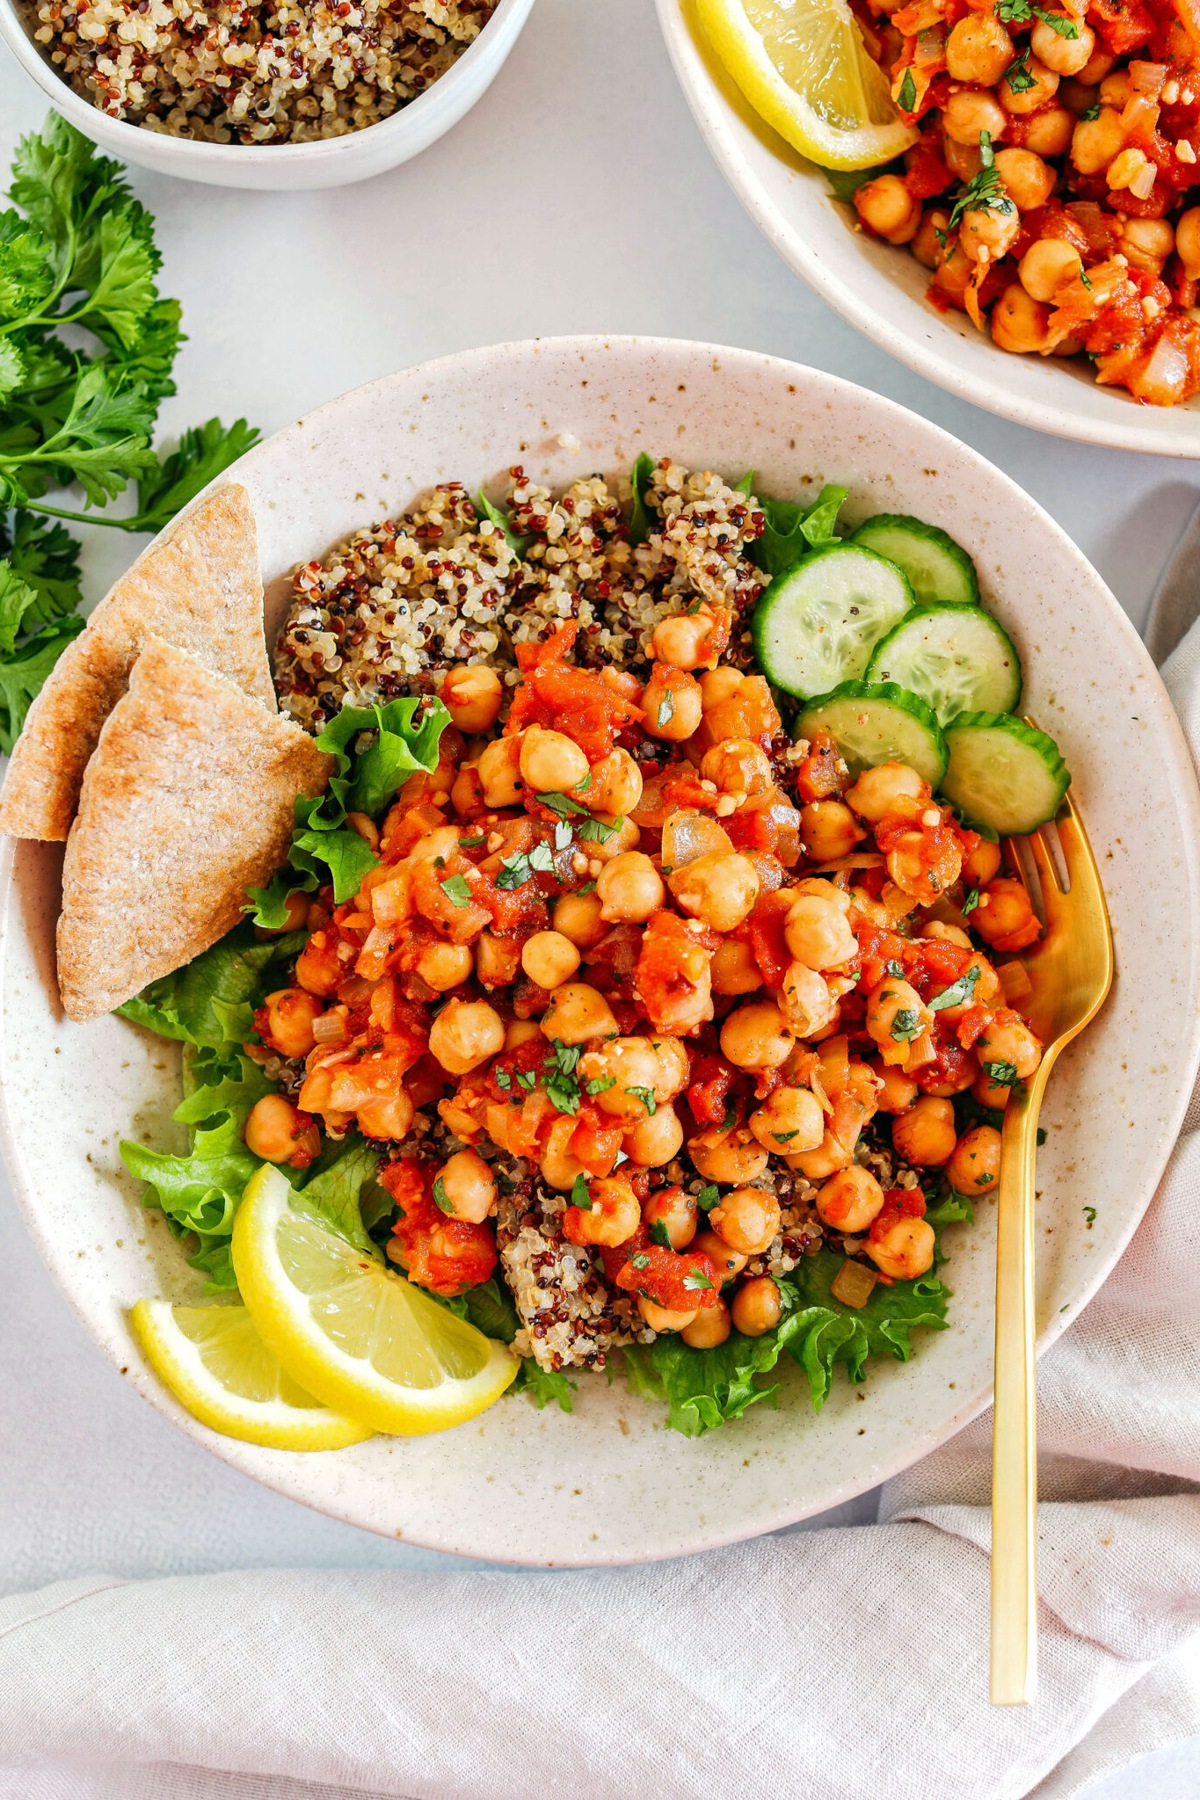 Spicy chickpea quinoa bowls with lots of veggies.